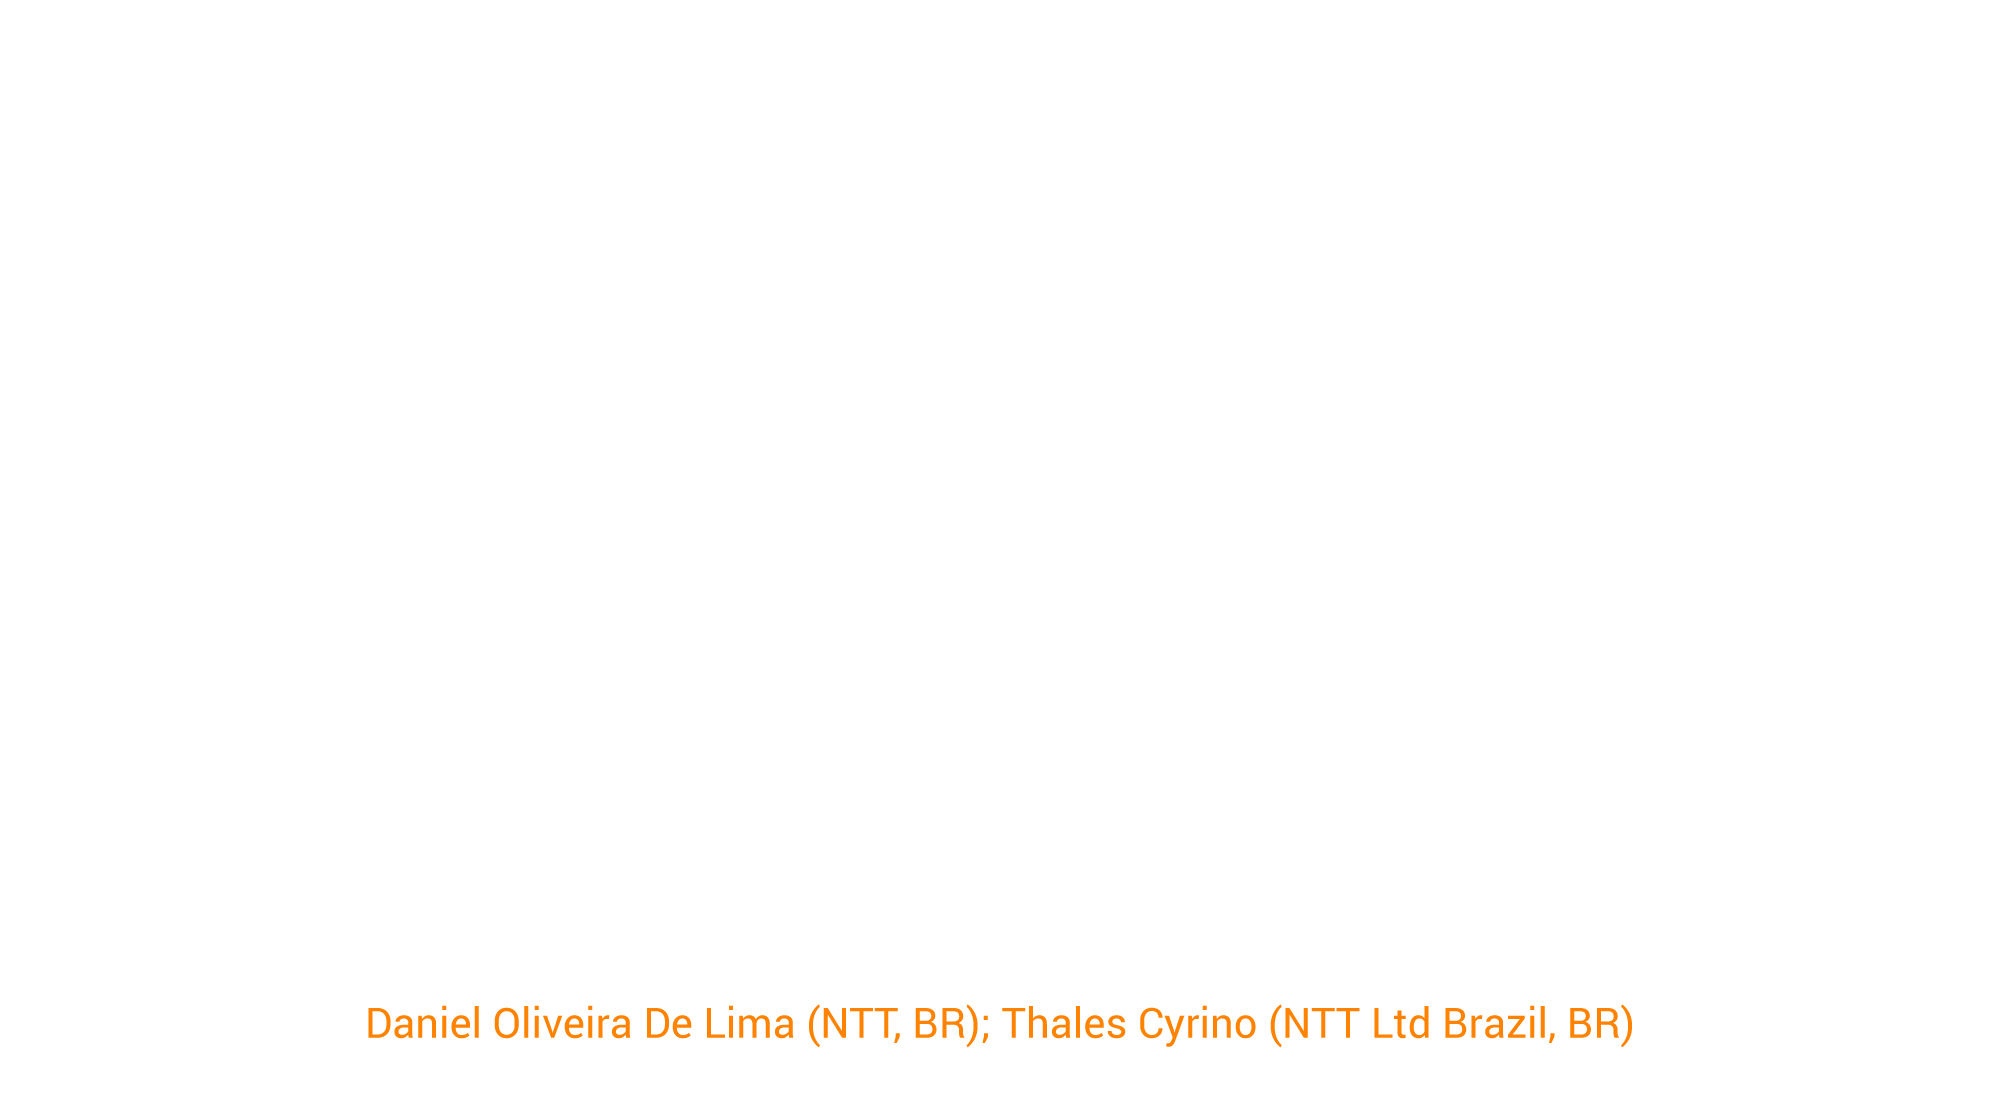 How I Handled One of the Biggest Banking Fraud Incidents of 2020